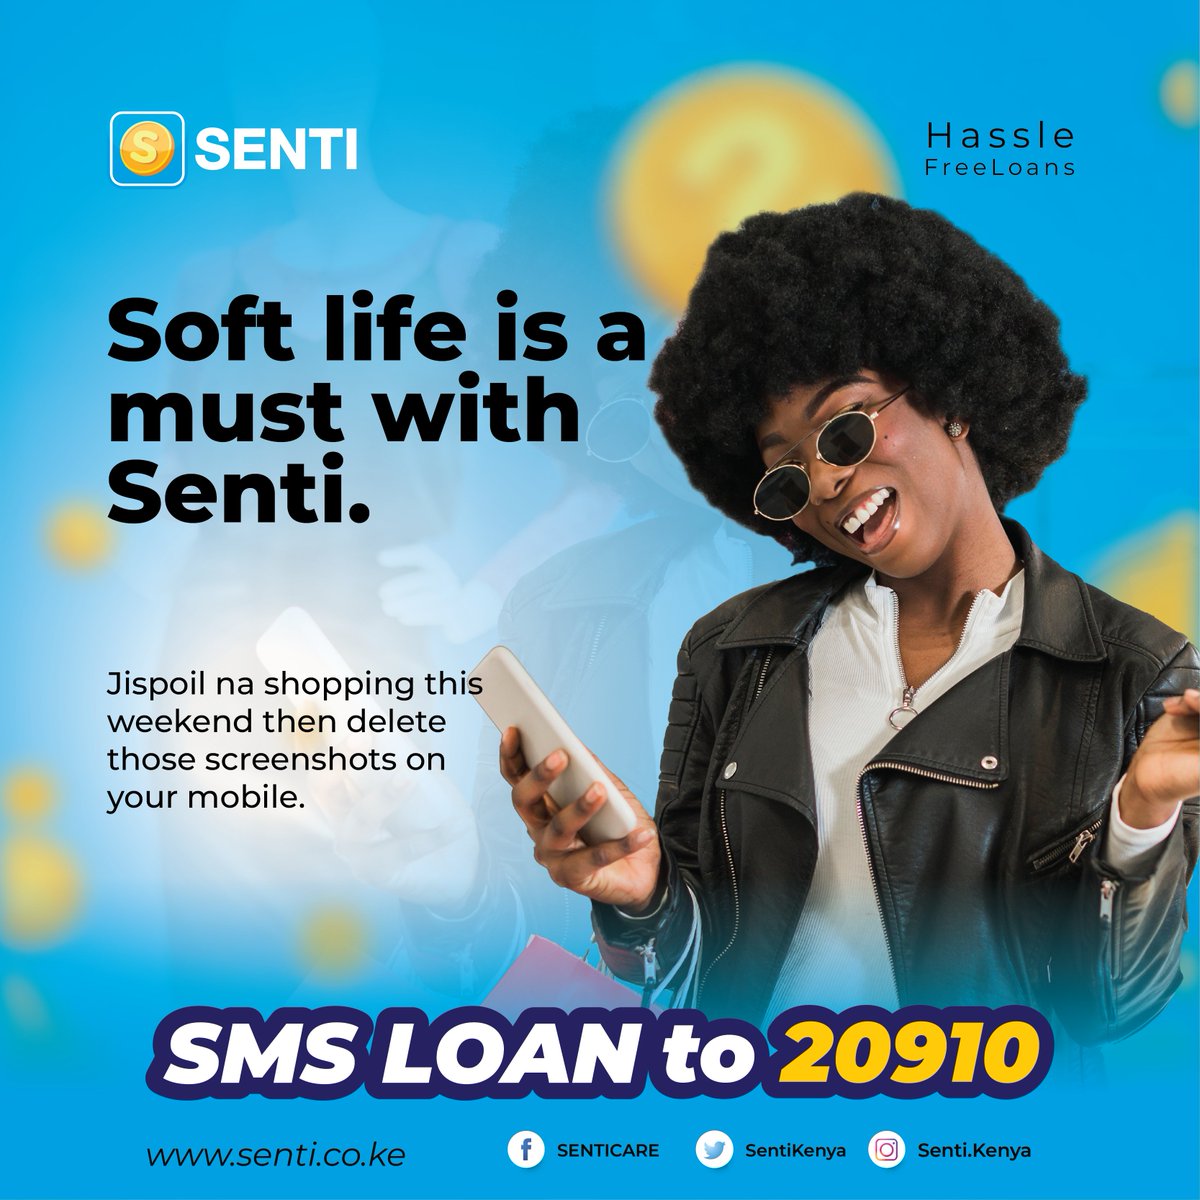 Boss up with Senti! Download the app to enjoy the weekend at your comfort.
#senti #senticare #sentiapp #weekend #friday #loanapplication #BusinessDaily #RHONairobi #UNGA